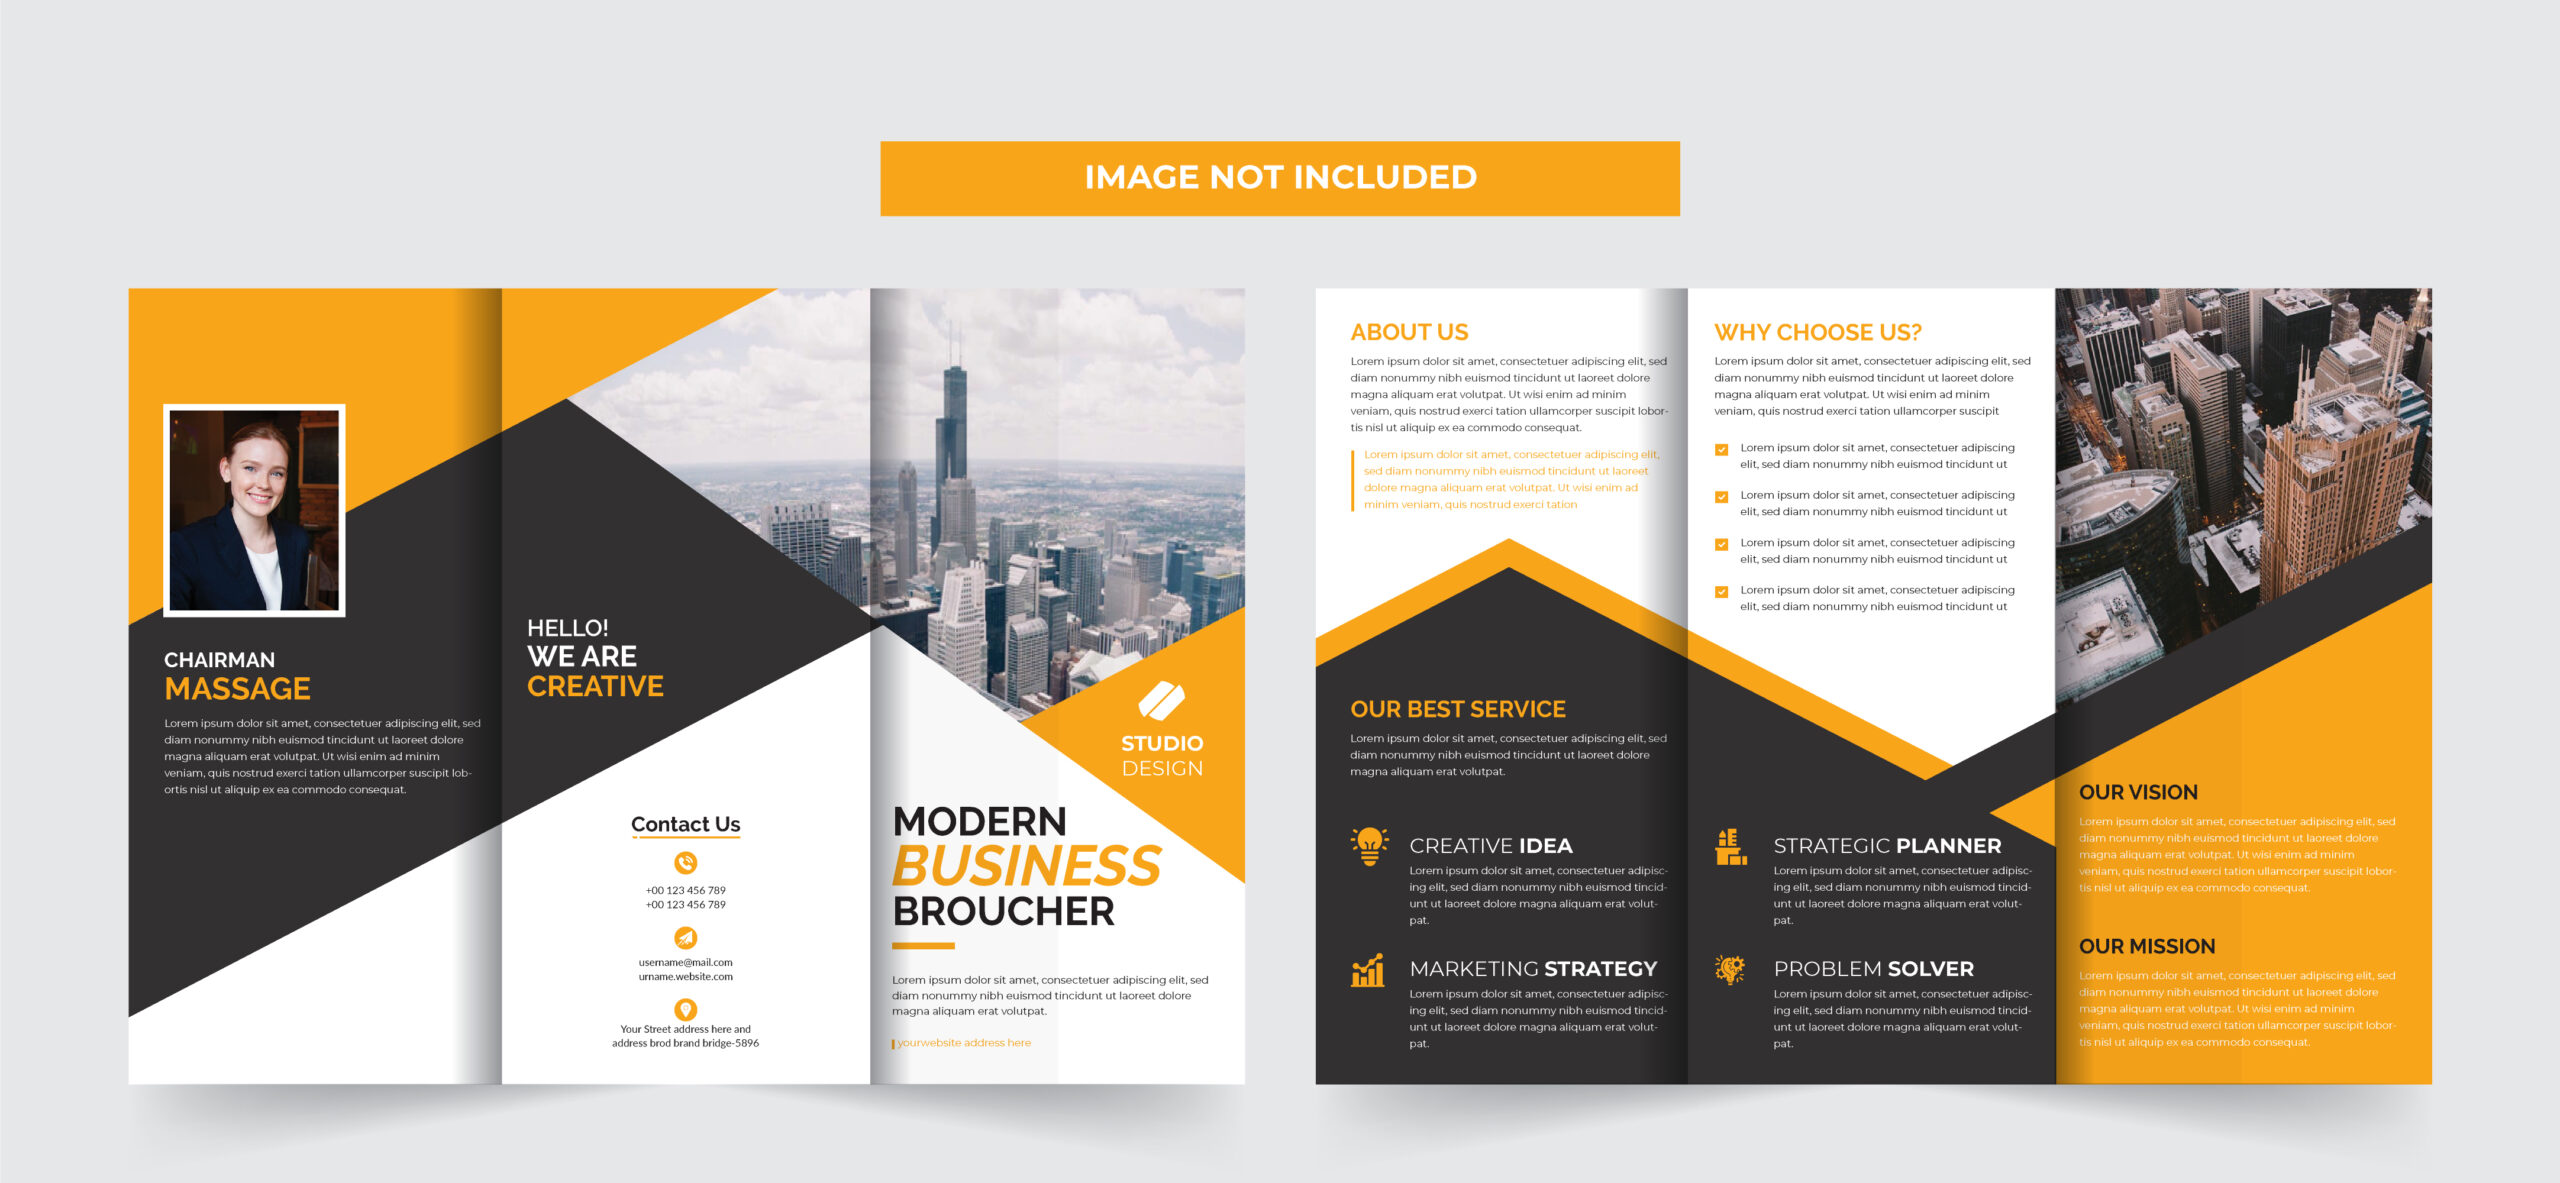 Brochure Templates Vector Art, Icons, and Graphics for Free Download Regarding Creative Brochure Templates Free Download